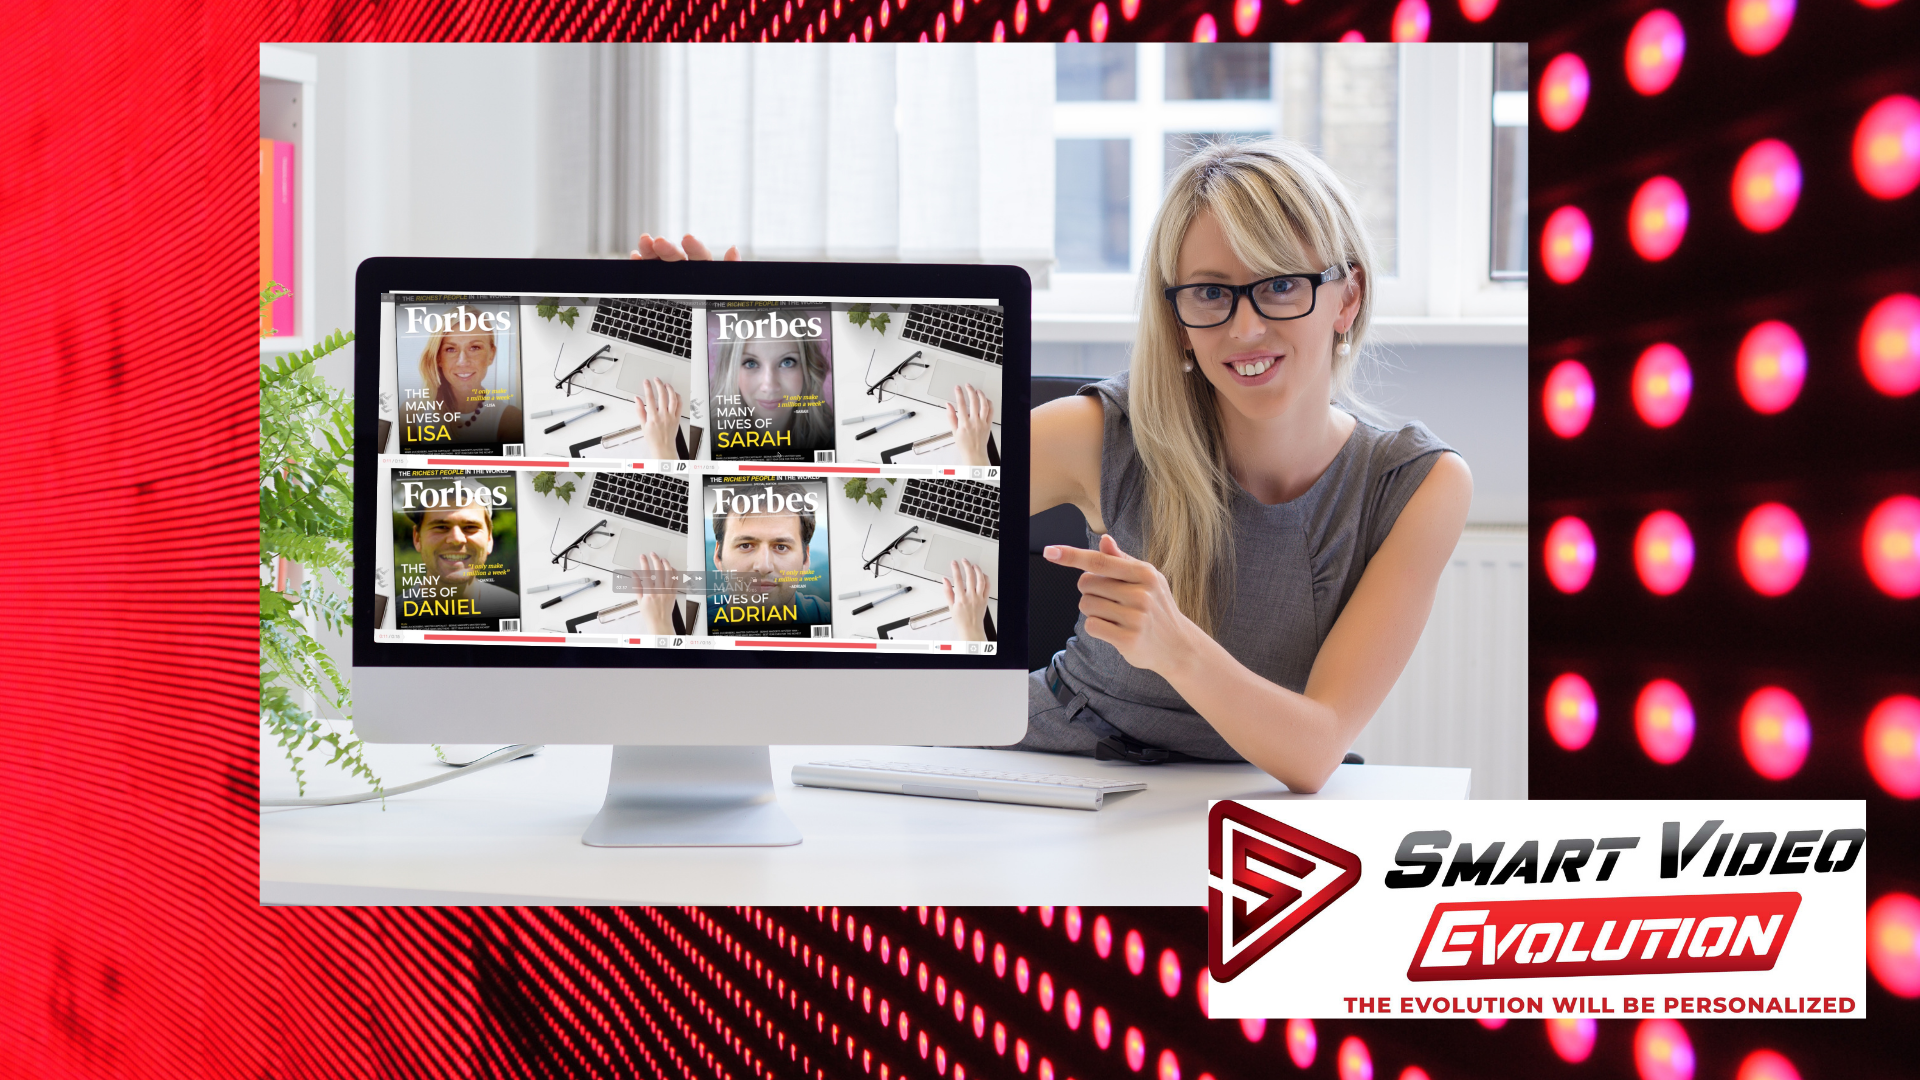 Smart Video Evolution Review: Should You Buy Smart Video Evolution 2021?